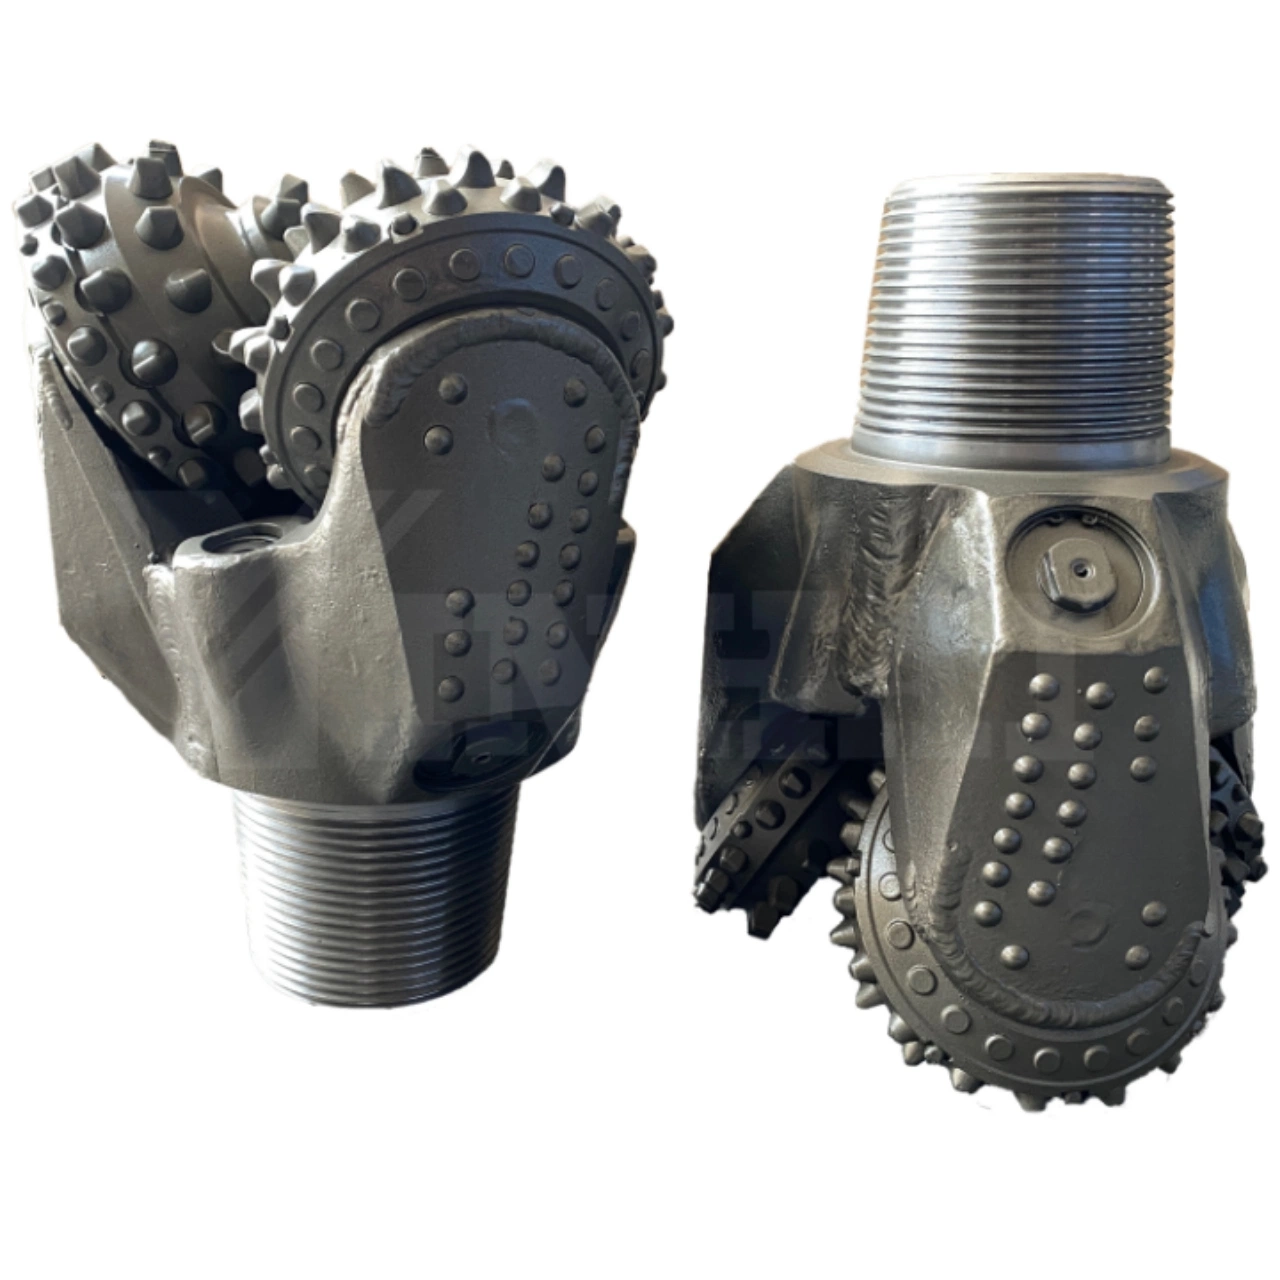 API 8 1/2" 12 1/4" 17 1/2" Tricone Bit/ Roller Cones Bit/ Rock Drill Bit, TCI Bit & Steel Tooth Bit, Water/Oil Well Drilling, Factory Good Price and Quality